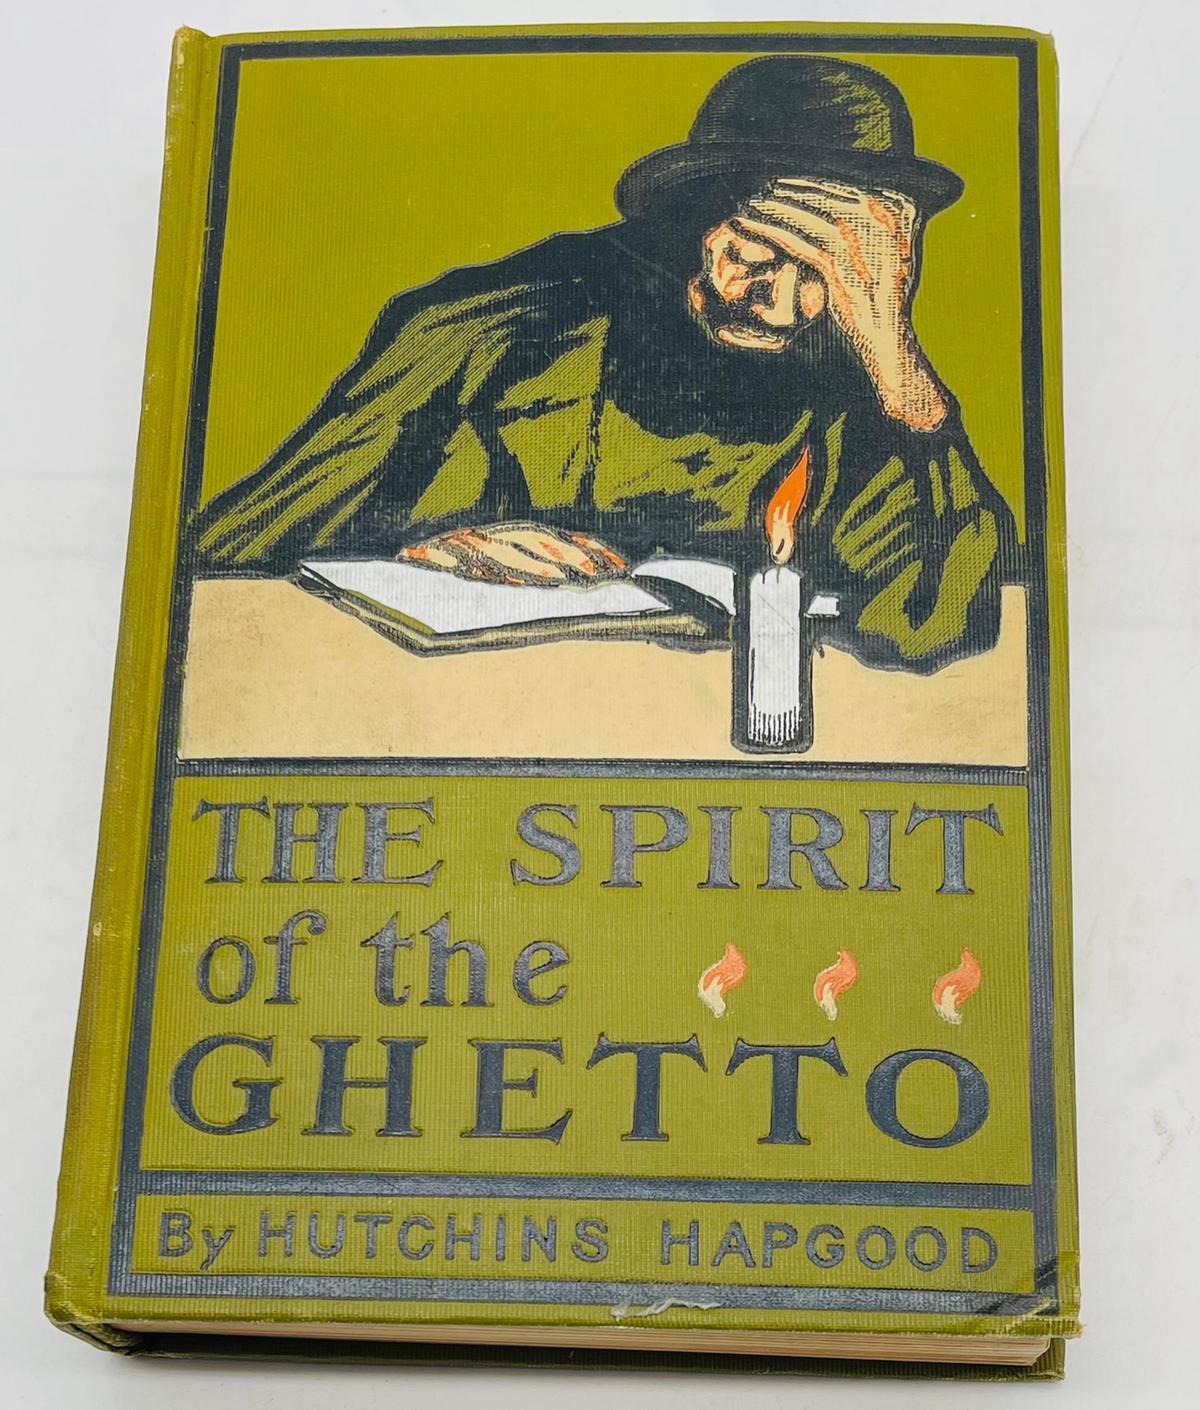 The Spirit of the Ghetto (1902) by Hutchins Hapgood